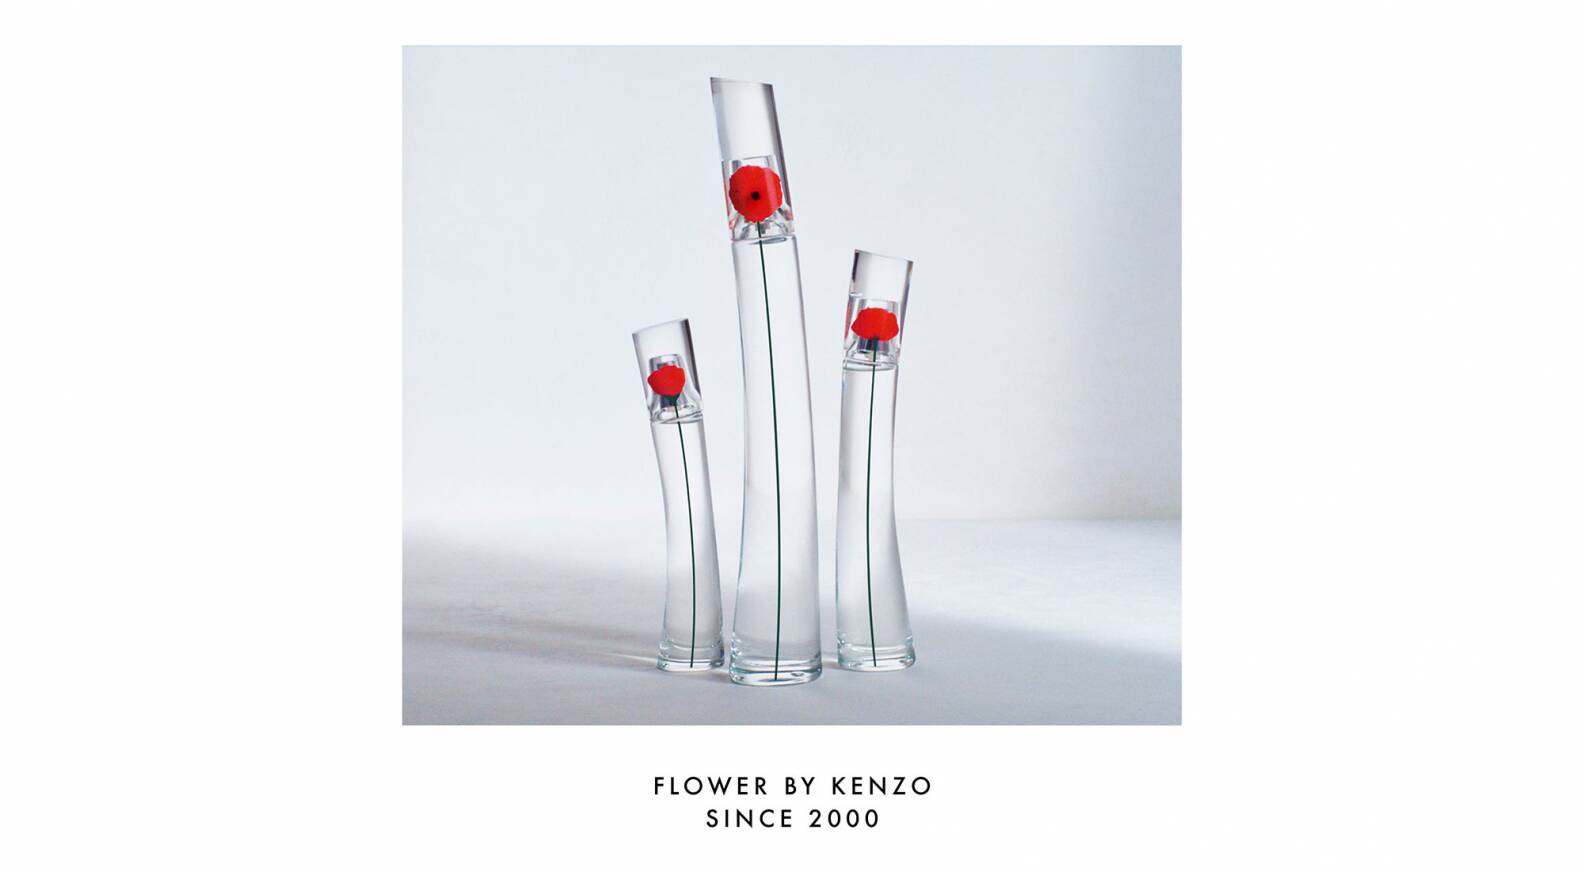 The iconic Flower LVMH its - Kenzo anniversary! By celebrates 20th